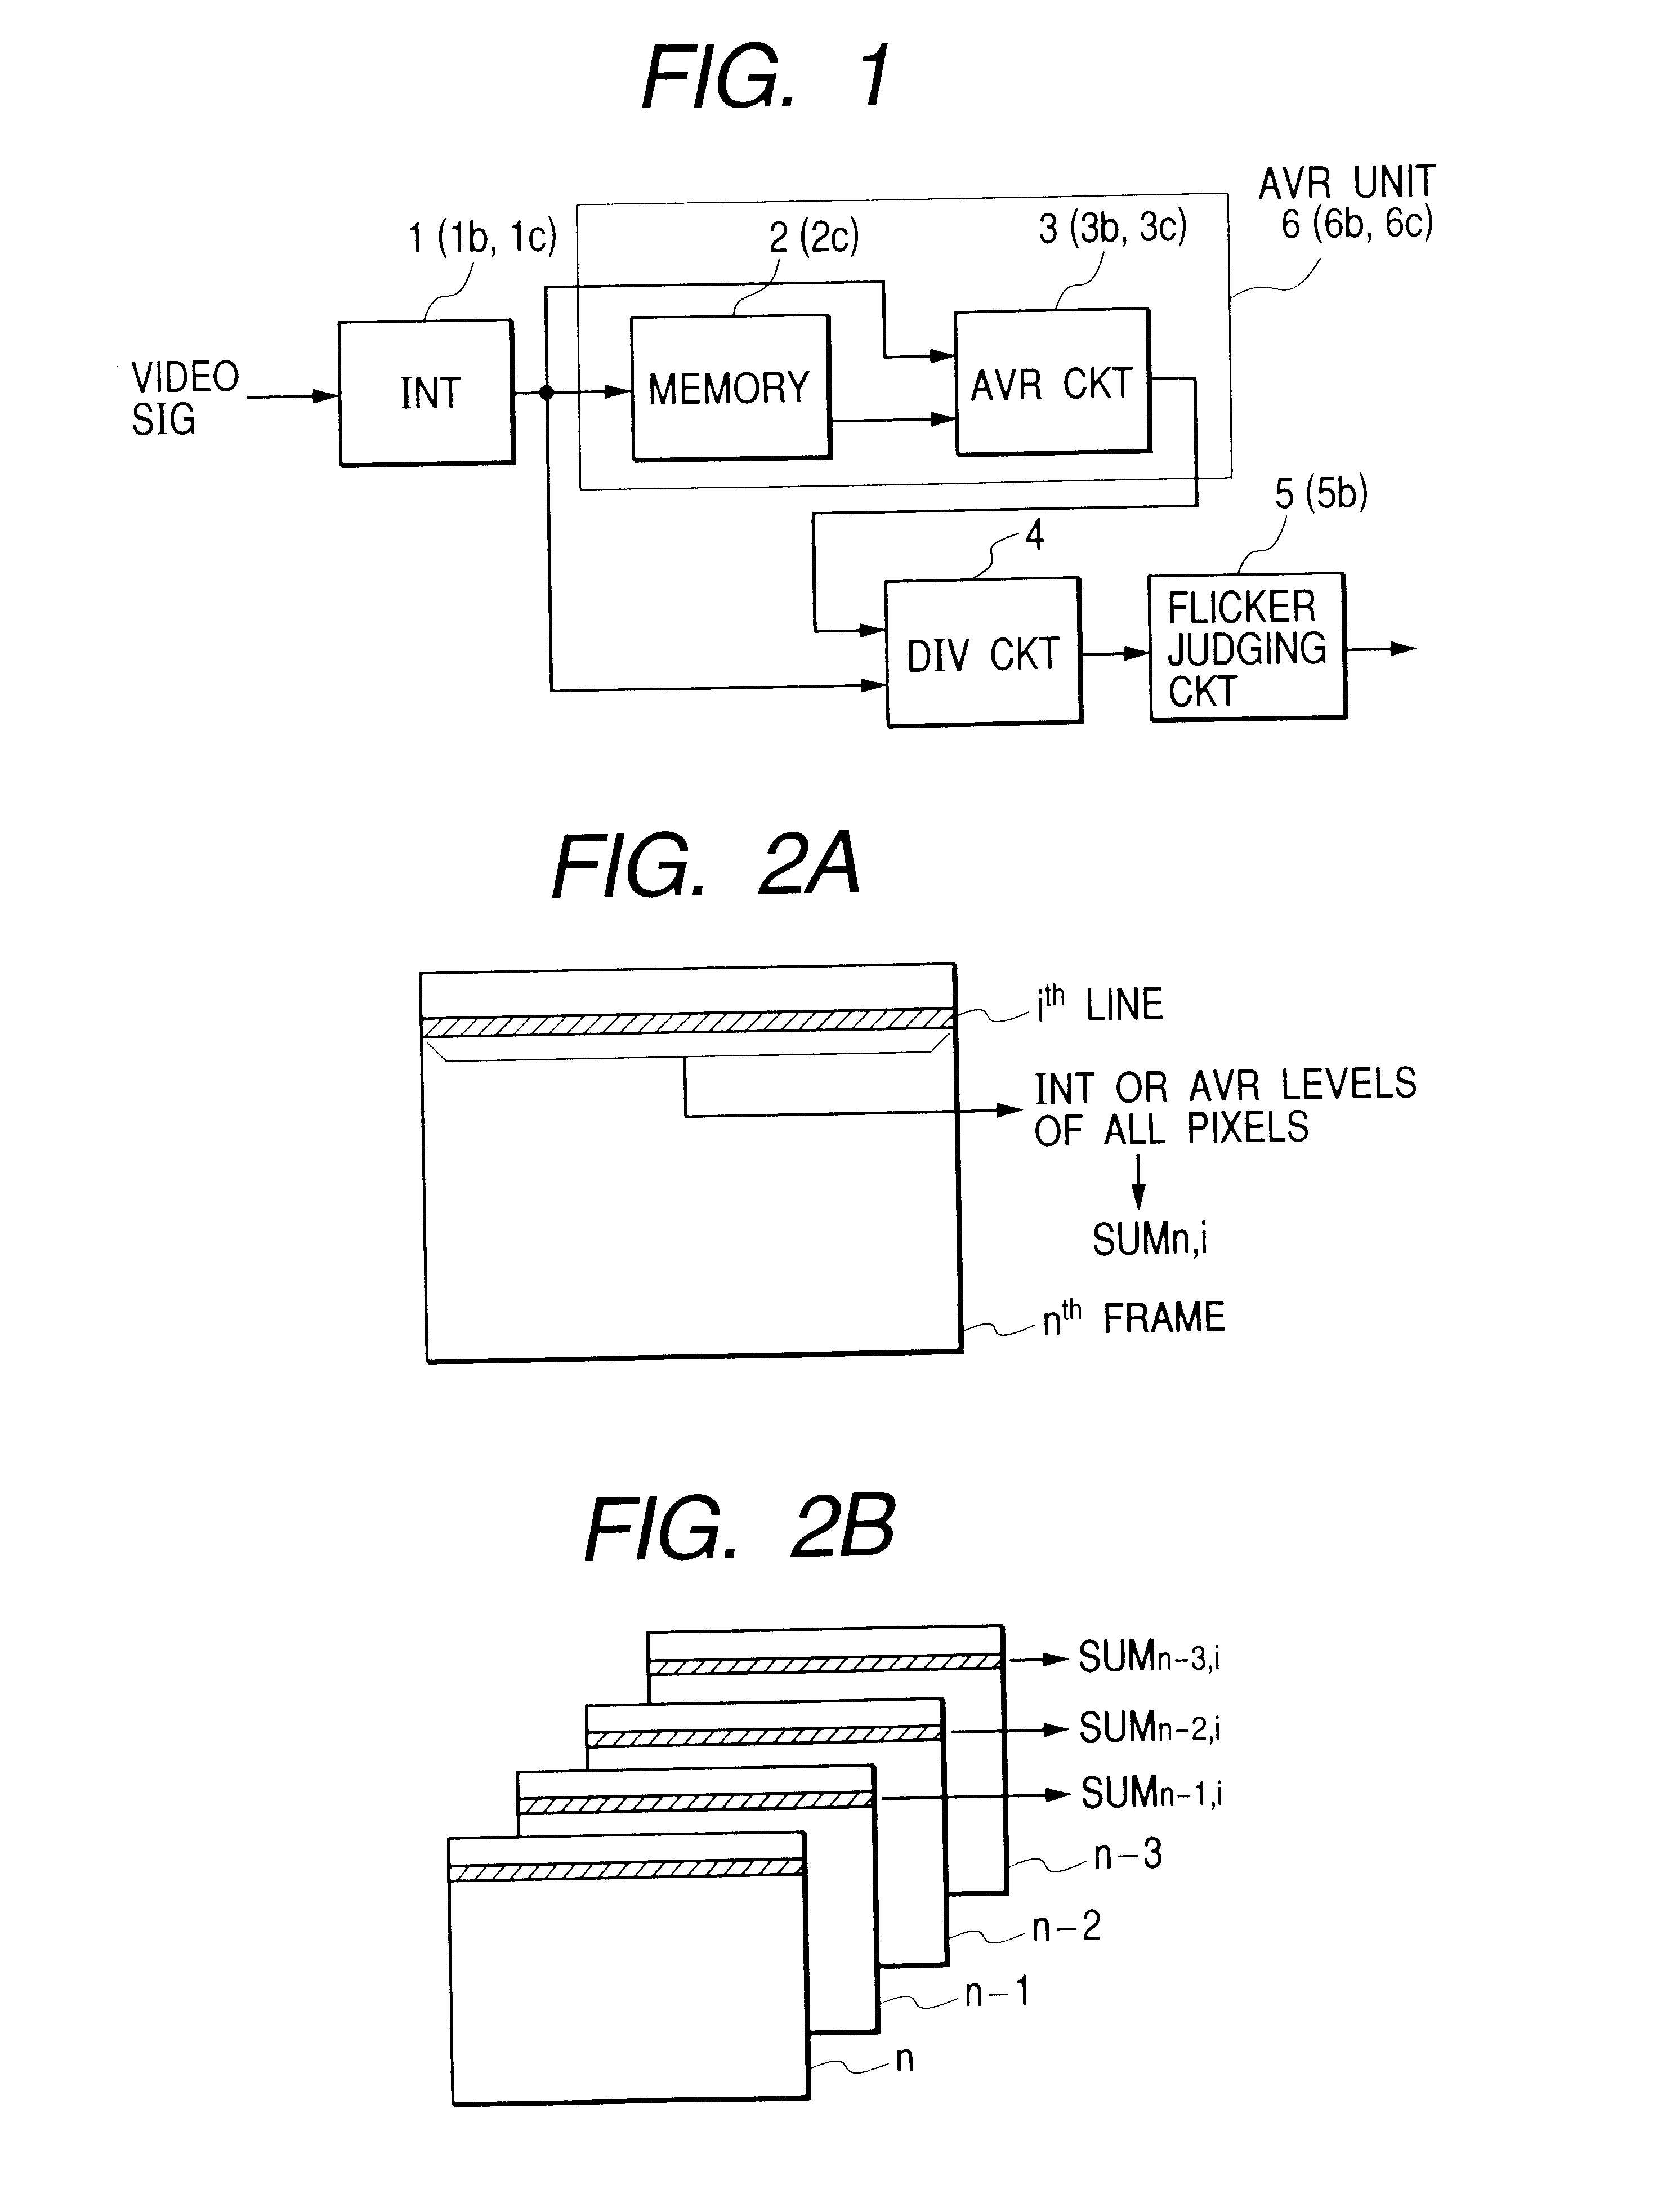 Illumination flicker detection apparatus, an illumination flicker compensation apparatus, and an ac line frequency detection apparatus, methods of detecting illumination flicker, compensating illumination flicker, and measuring ac line frequency